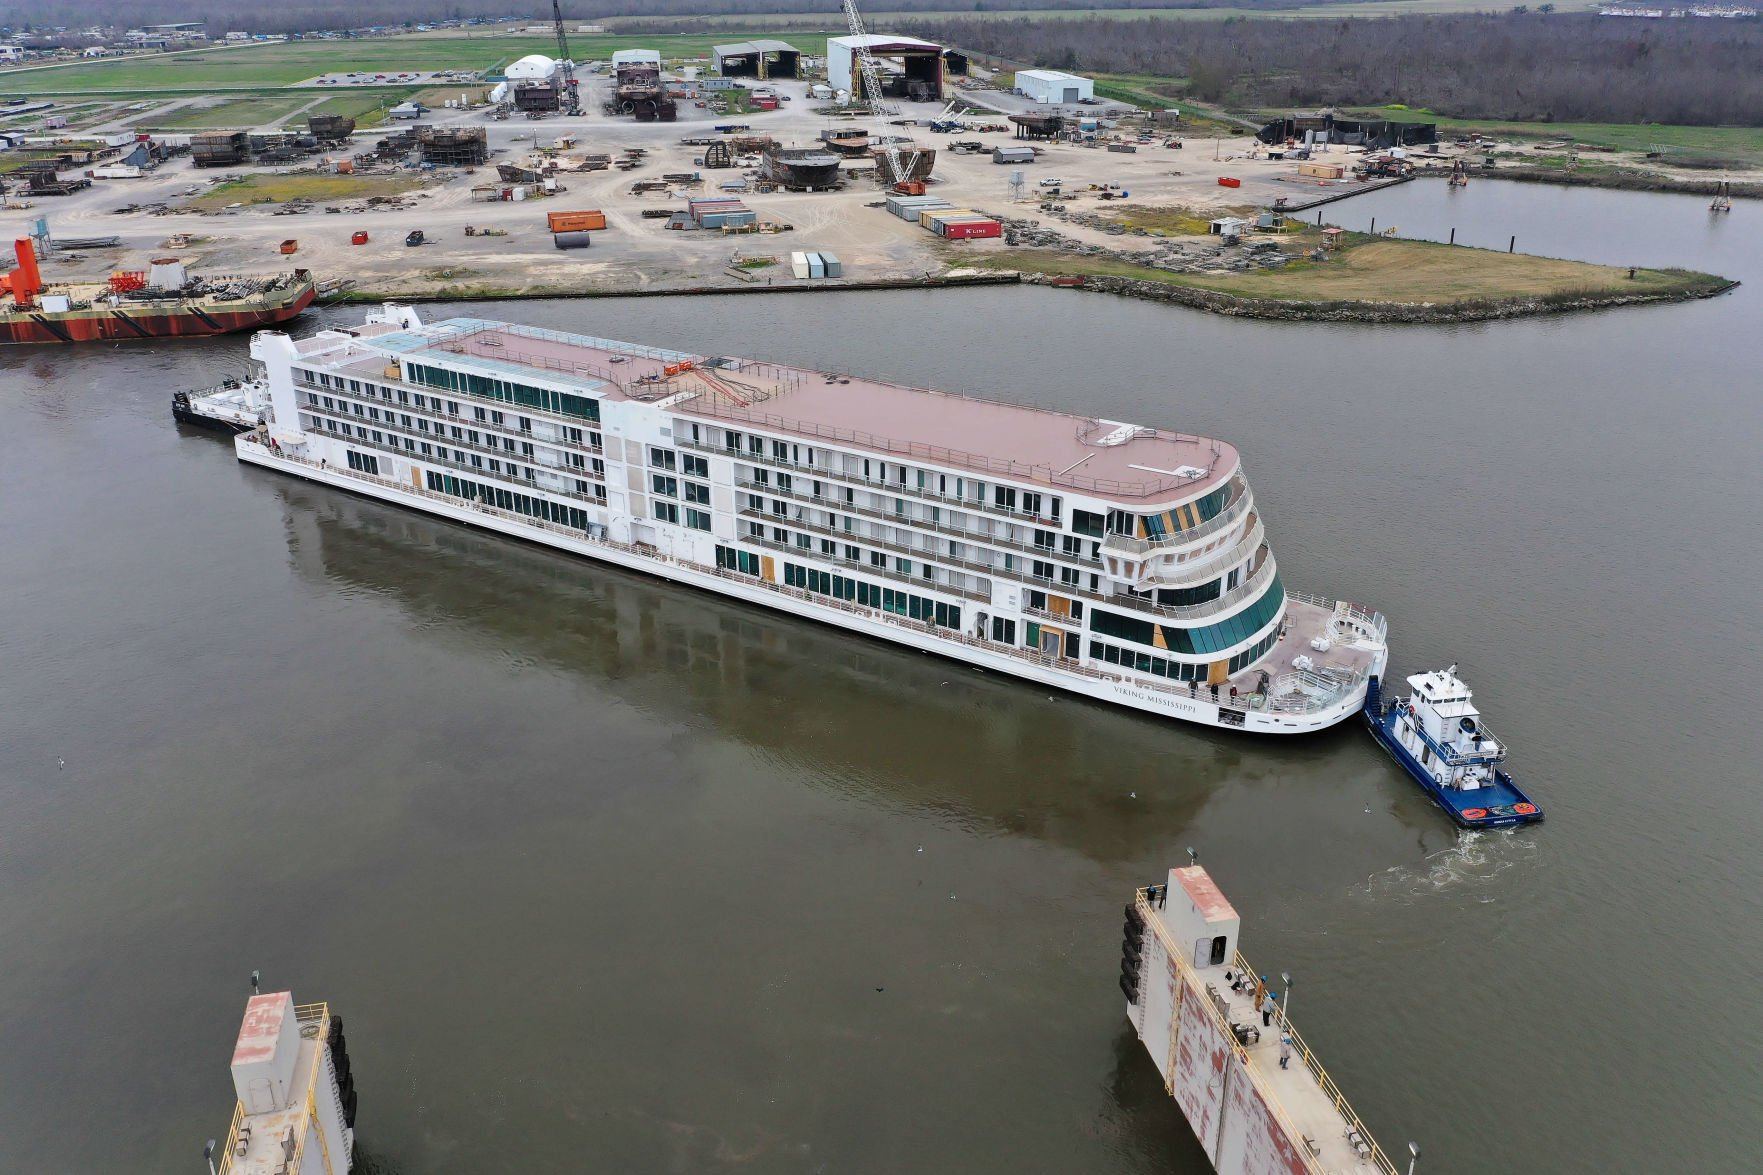 The ship Viking Mississippi had its “float out” this week in Louisiana. The company will launch Mississippi River tours this summer that include stops in Dubuque.    PHOTO CREDIT: Viking